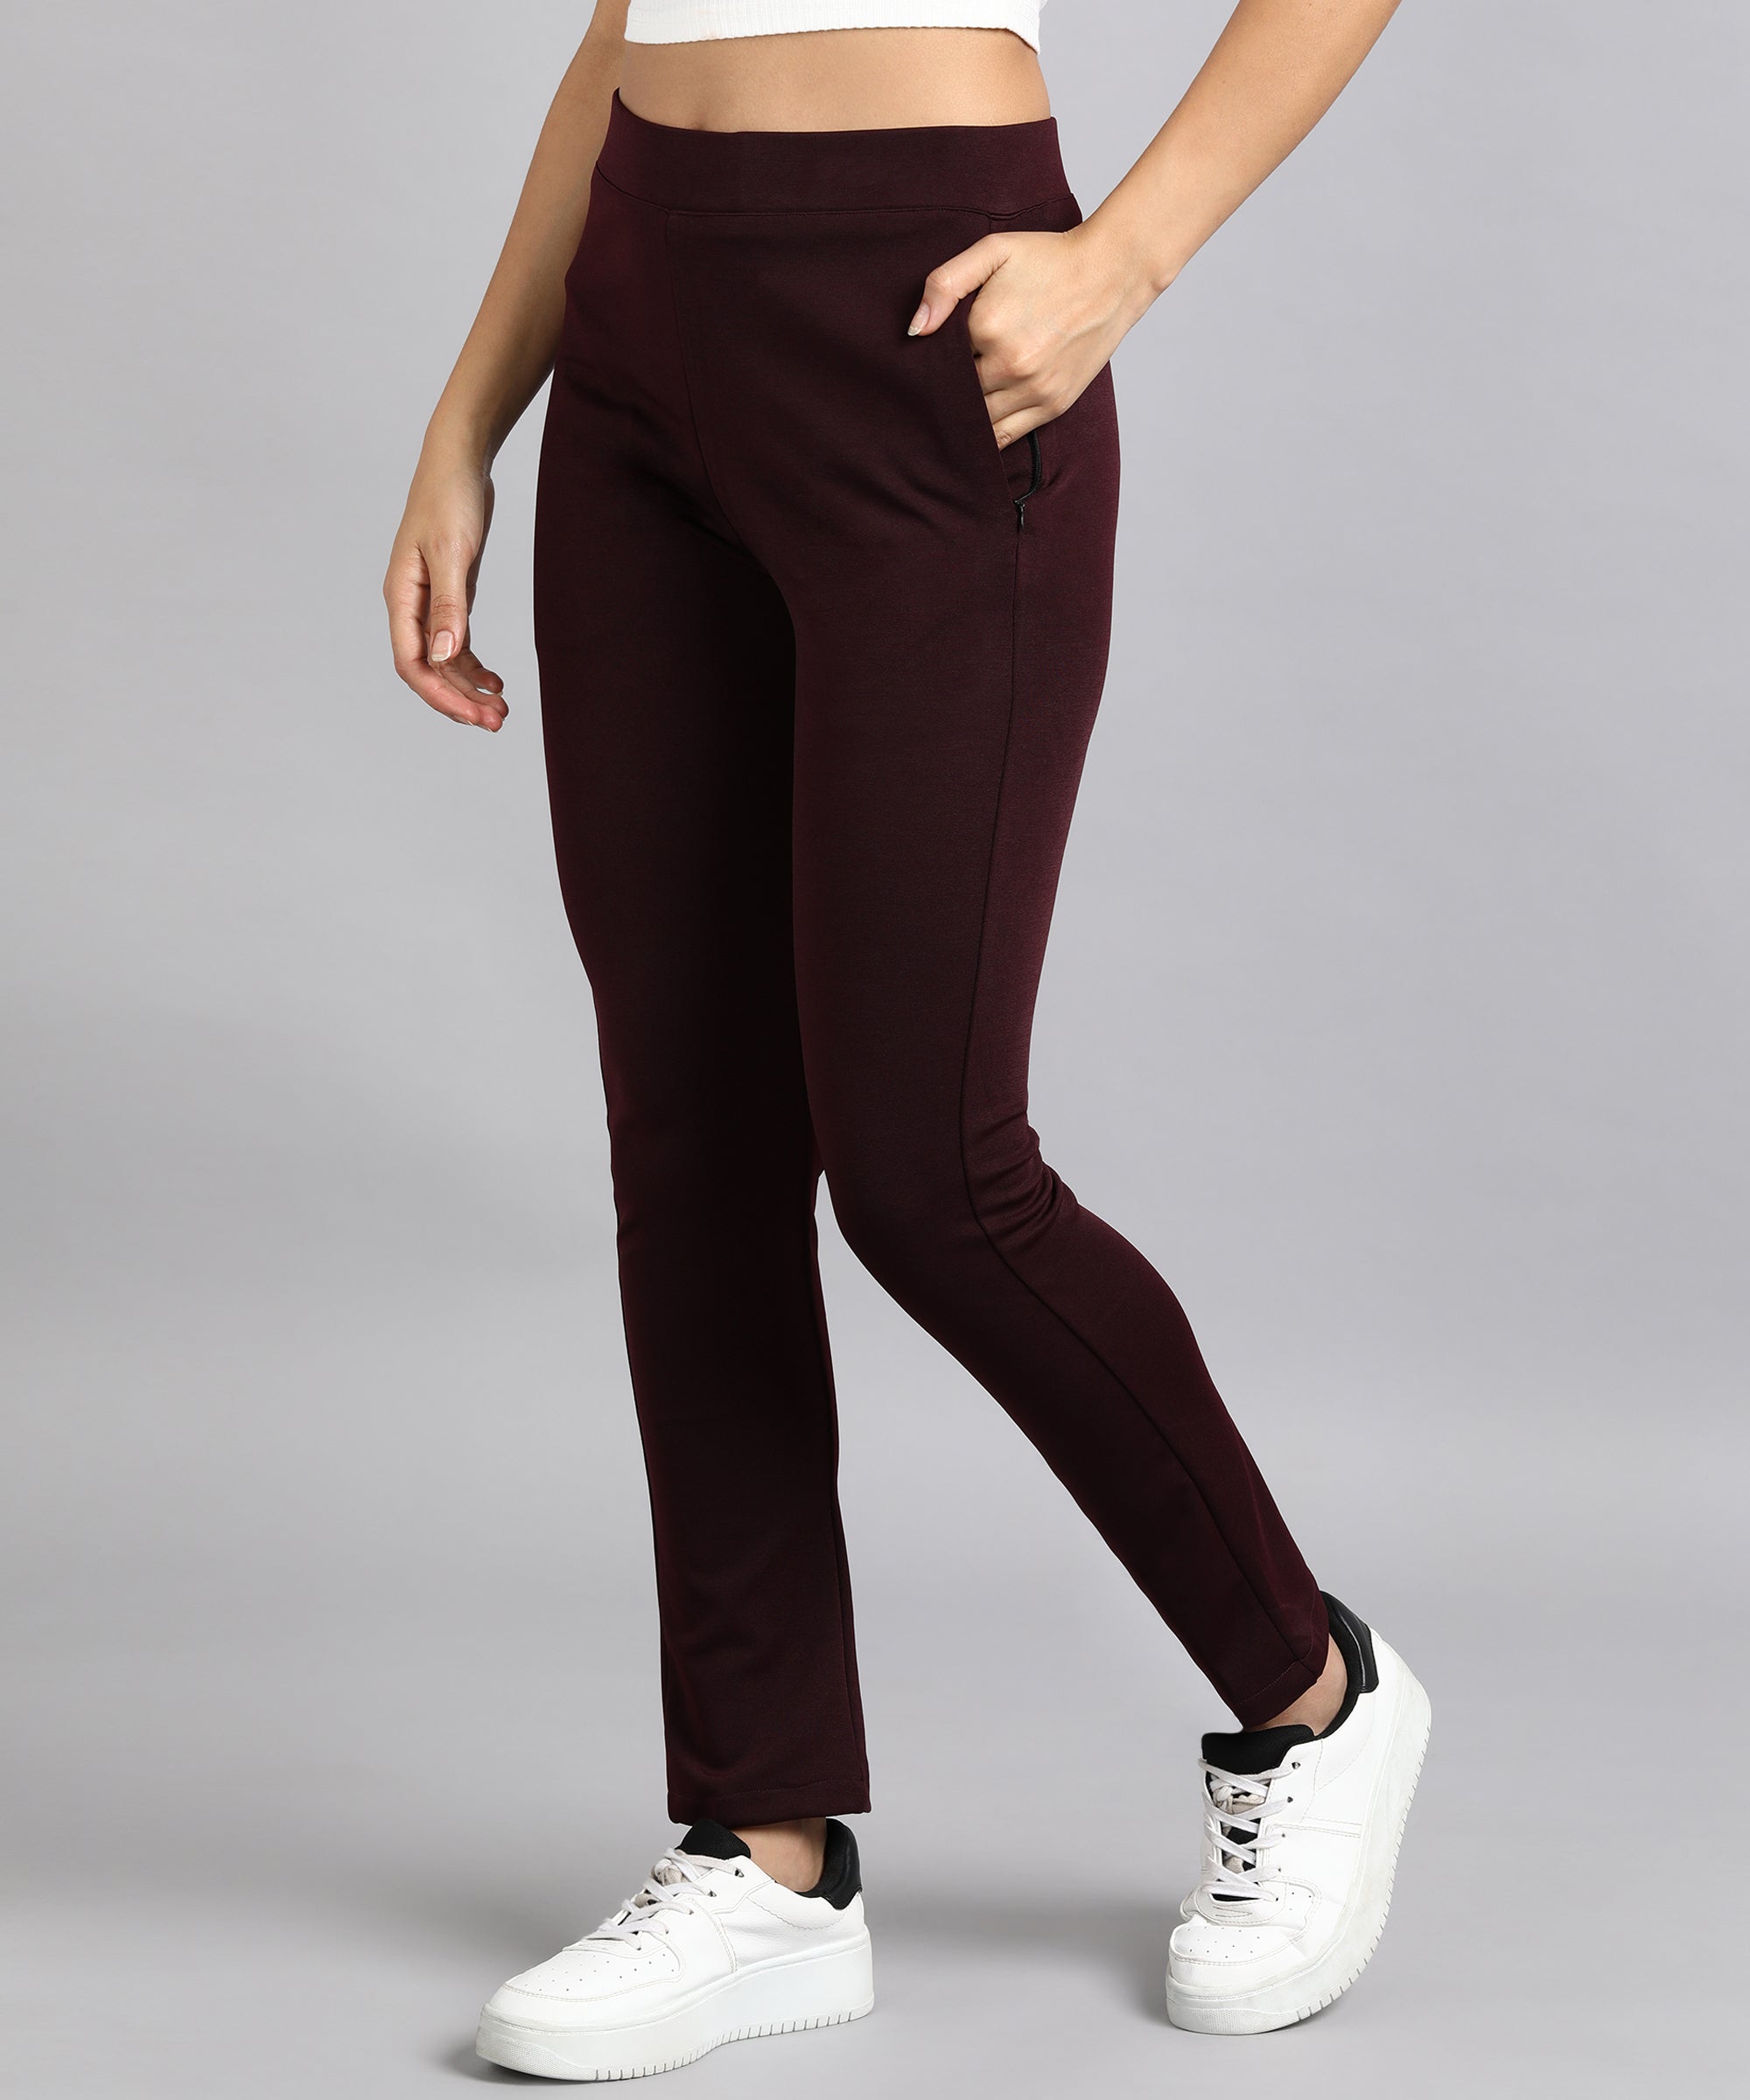 Mondetta Womens Lined Tailored Pant High-Rise Comfort Stretch | eBay